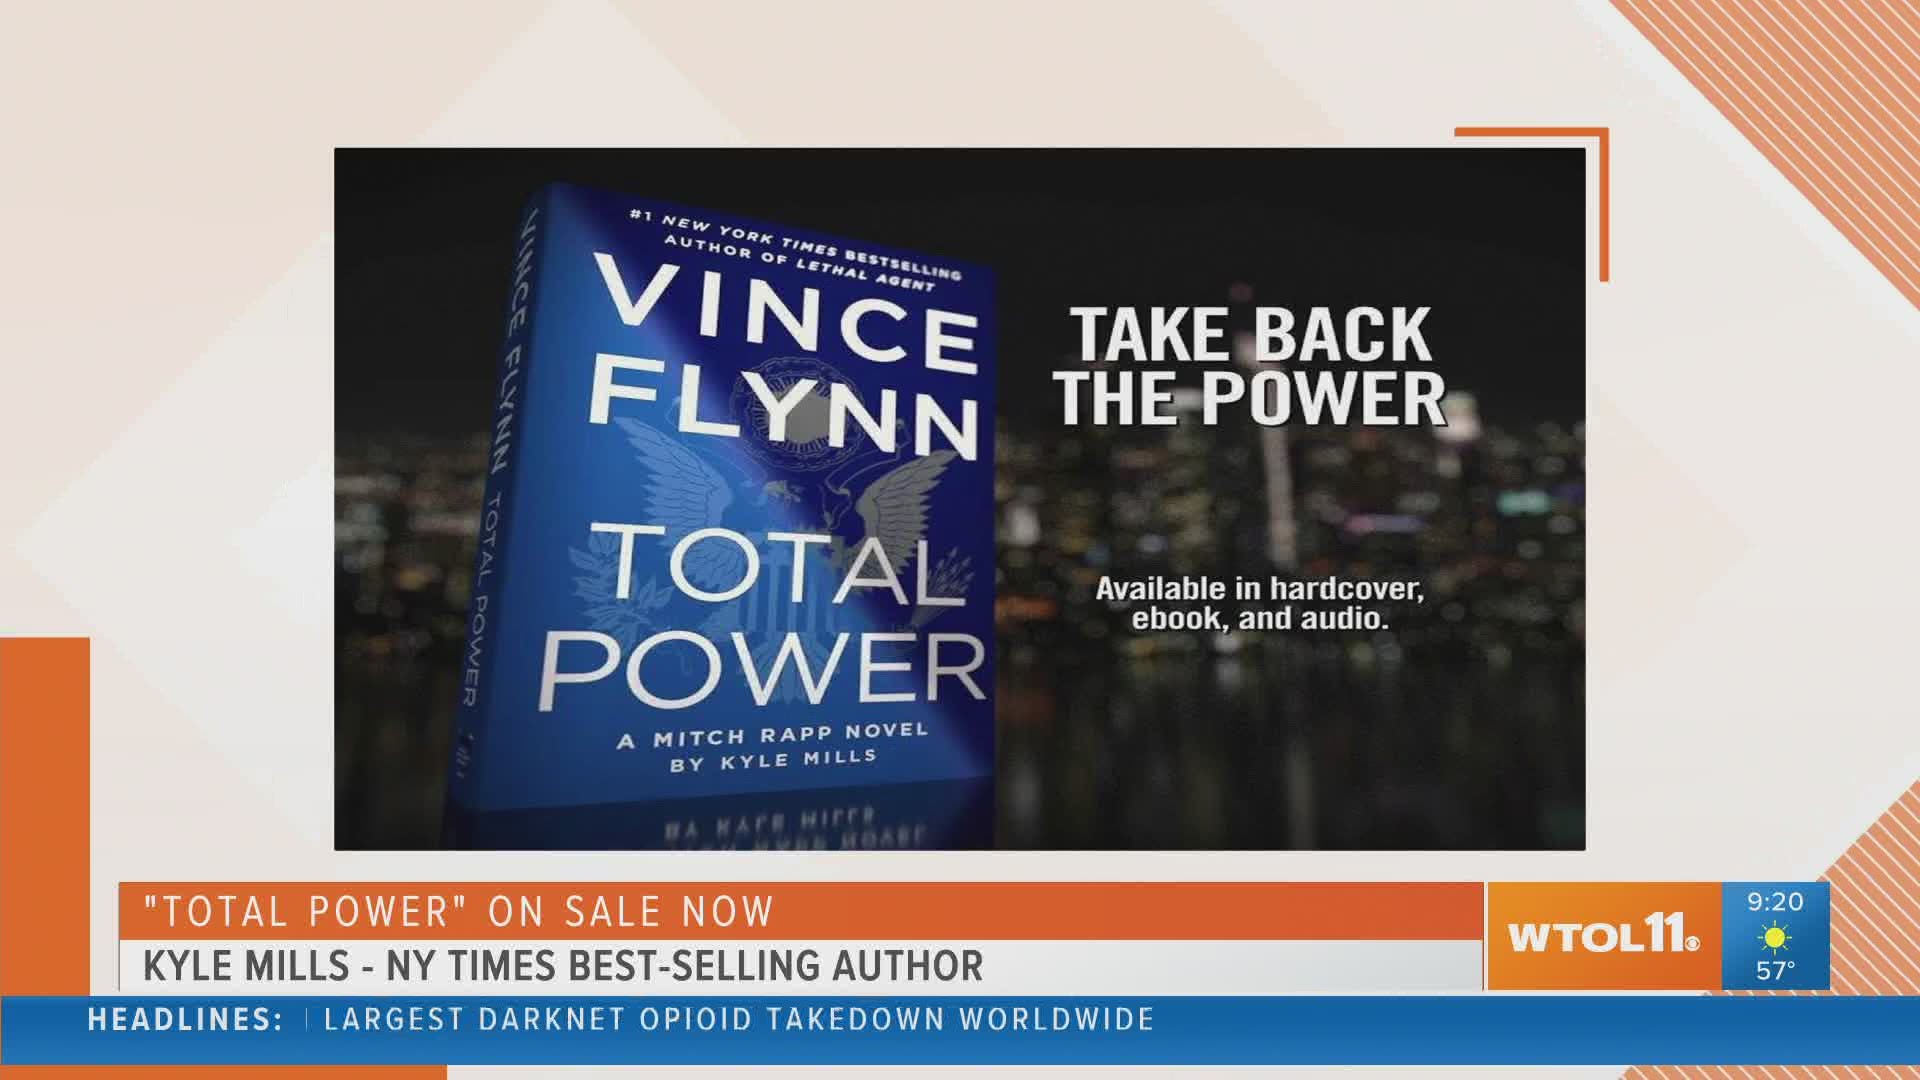 Best-selling author Kyle Mills has written a thriller you won't want to miss - pick up a copy of "Total Power" now!